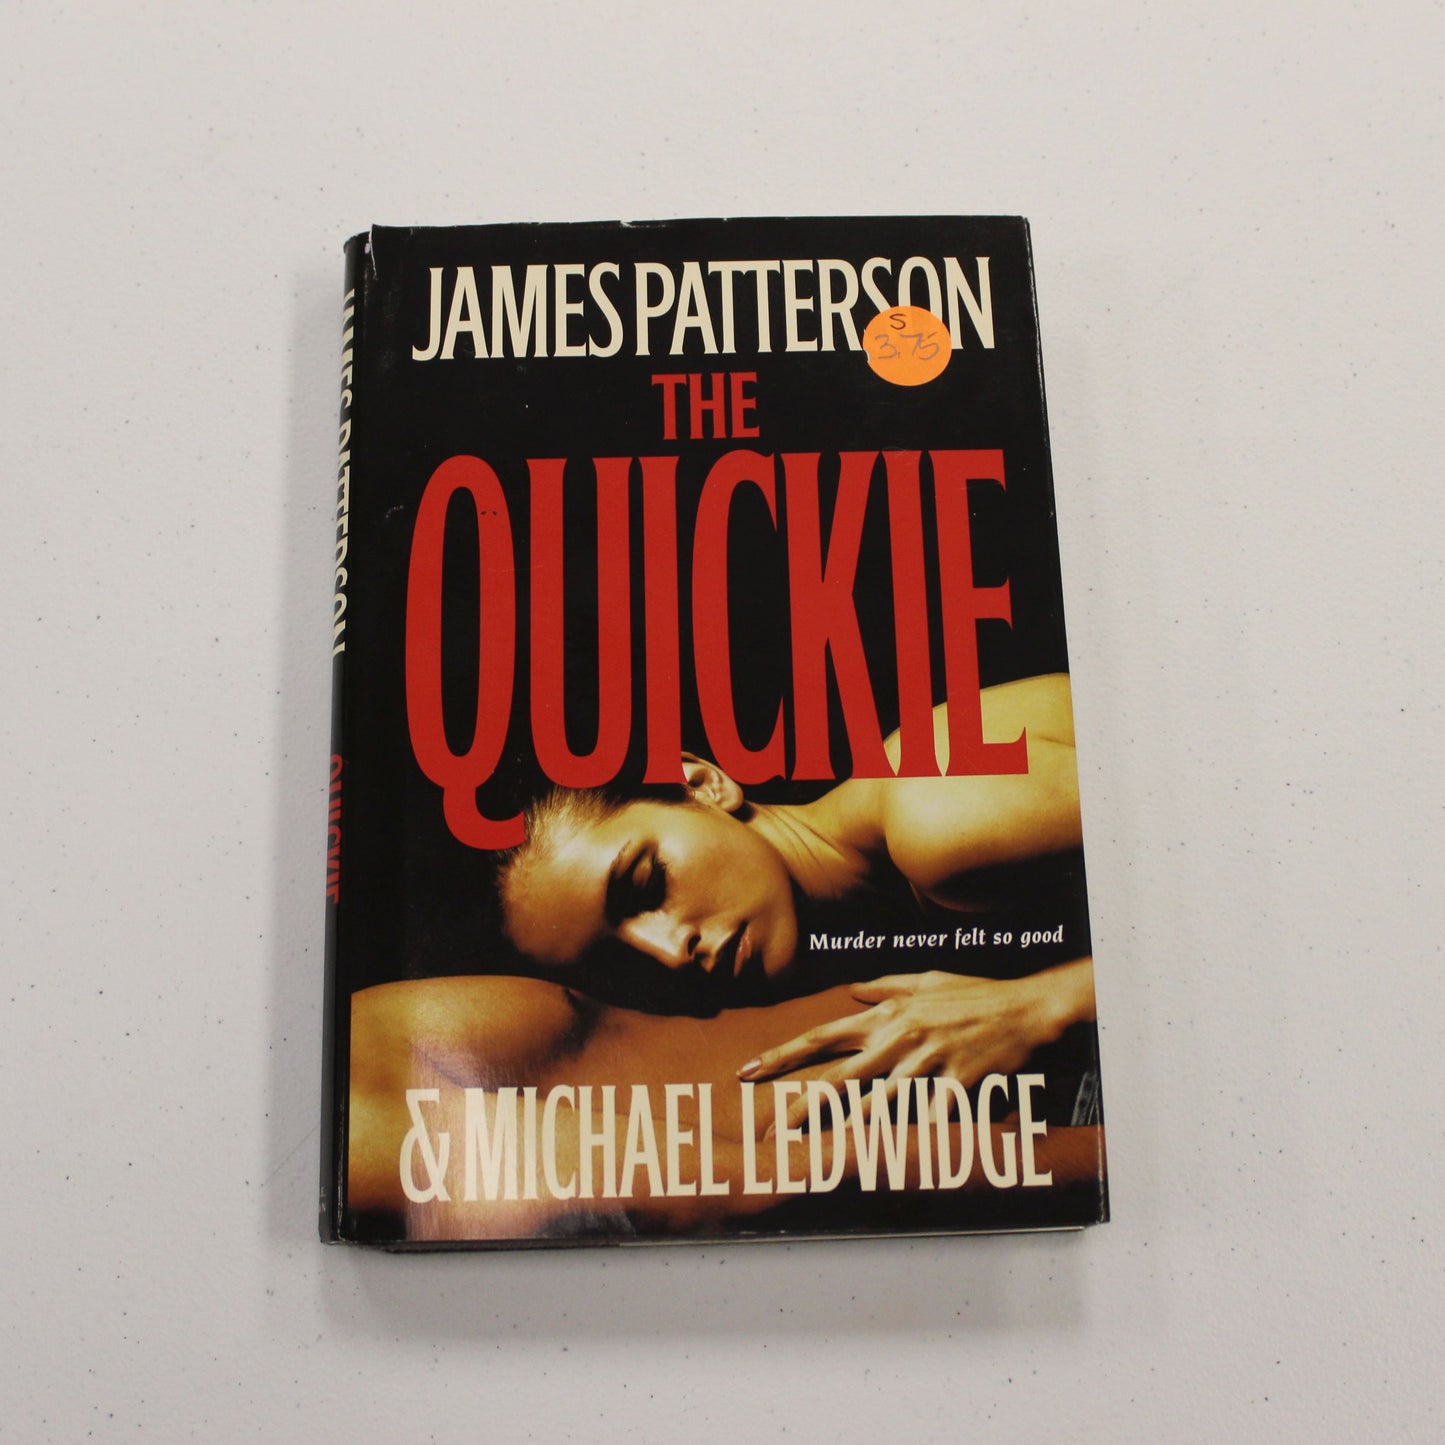 THE QUICKIE